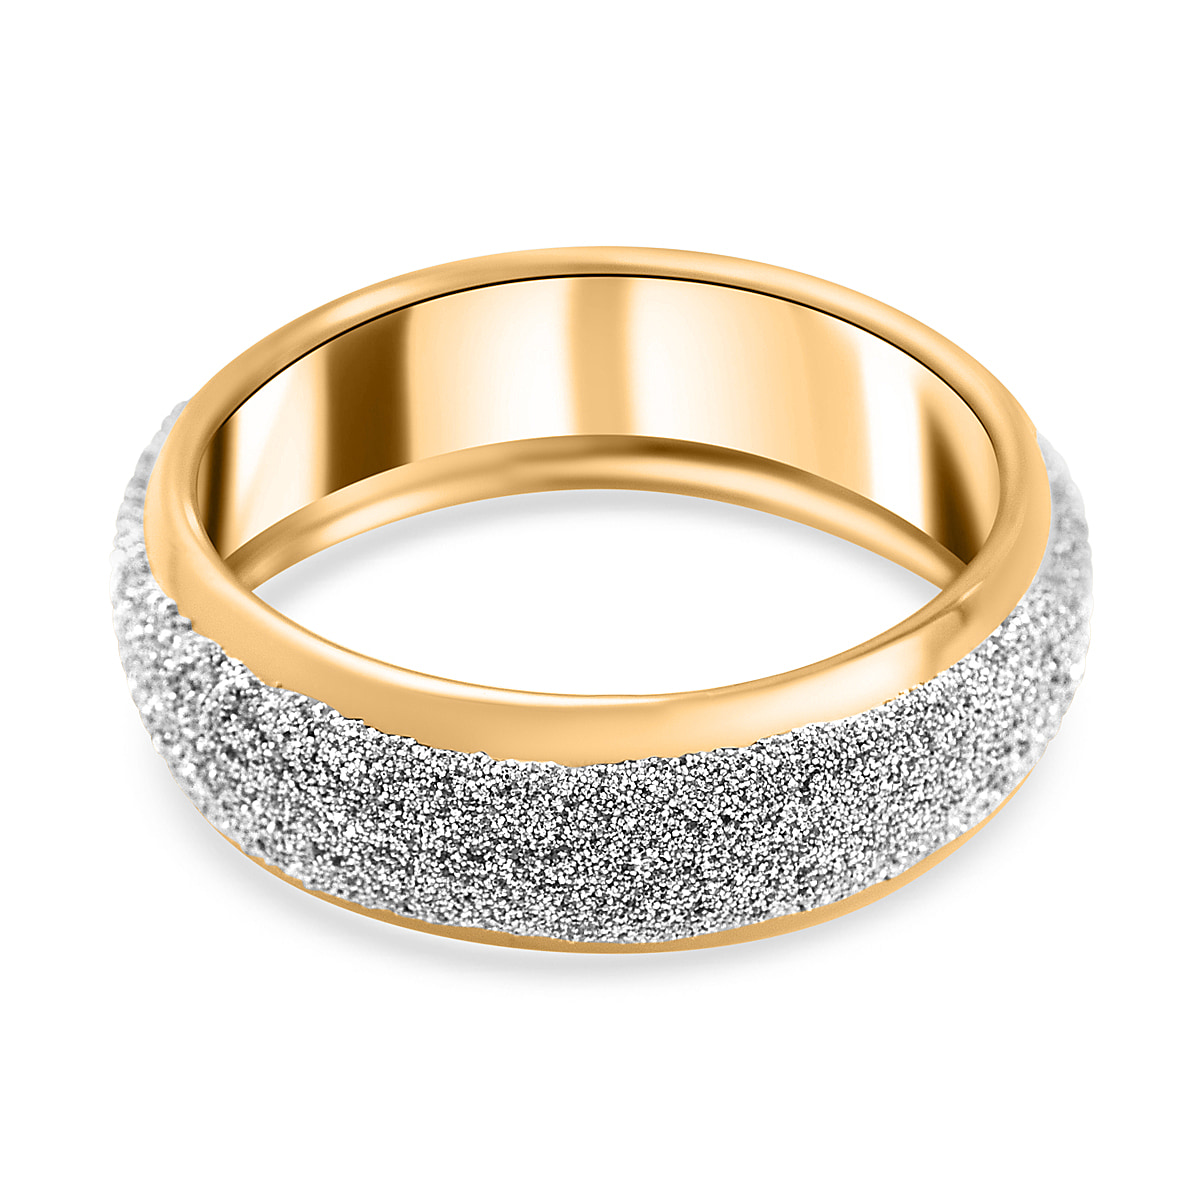 Maestro Collection - 9K Yellow Gold Sand Blast Band Ring